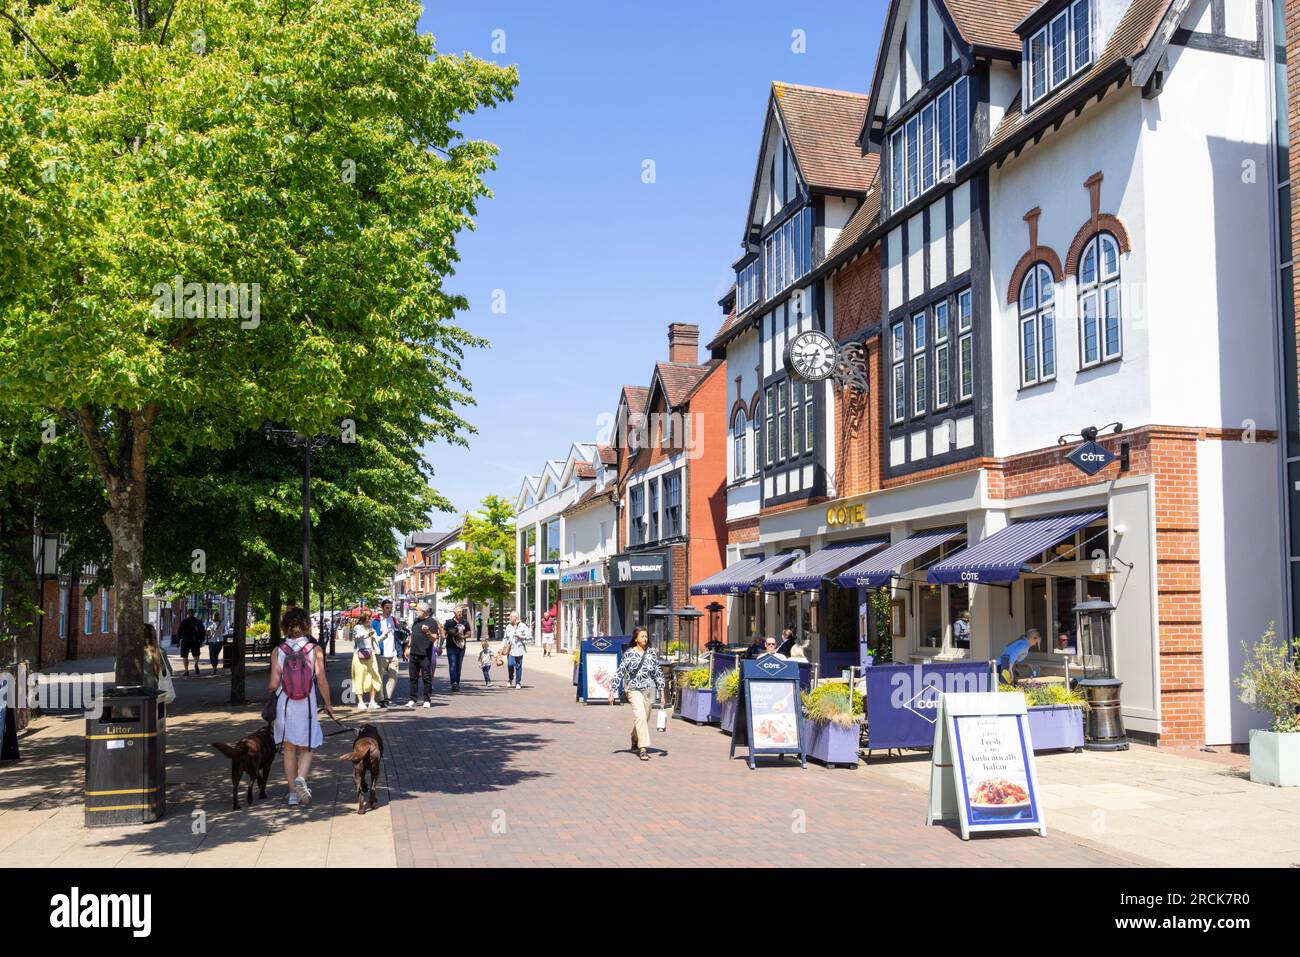 Solihull town centre with shops and Cote restaurant Solihull High street Solihull West Midlands England UK GB Europe Stock Photo